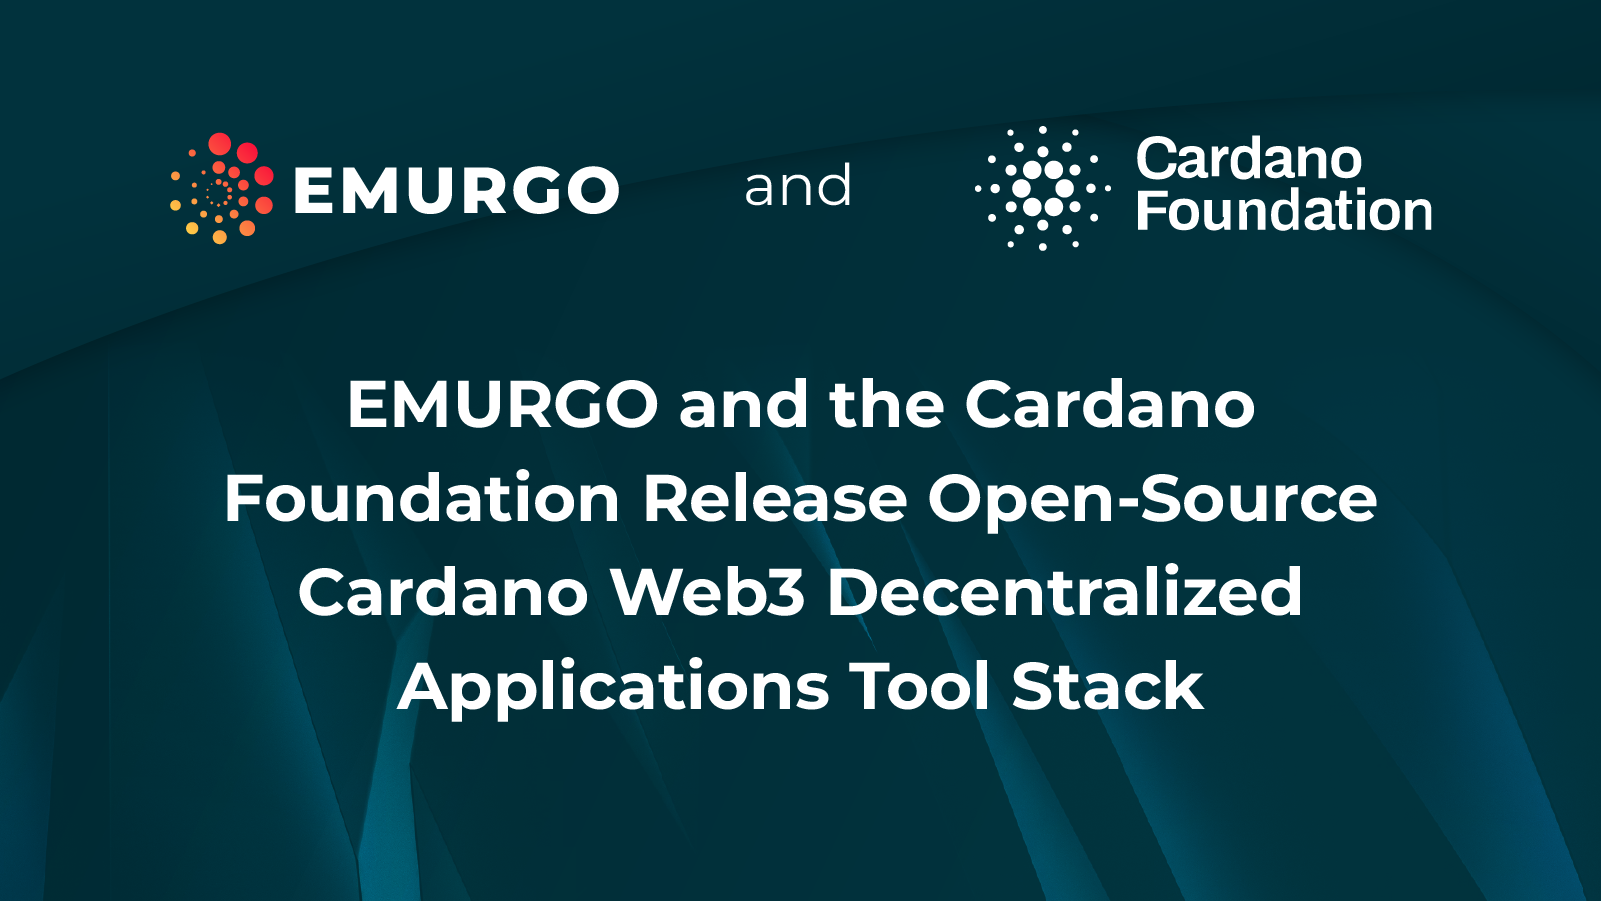 EMURGO-Cardano-Foundation-Release-Decentralized-Applications-Tool-Stack-Developers.png